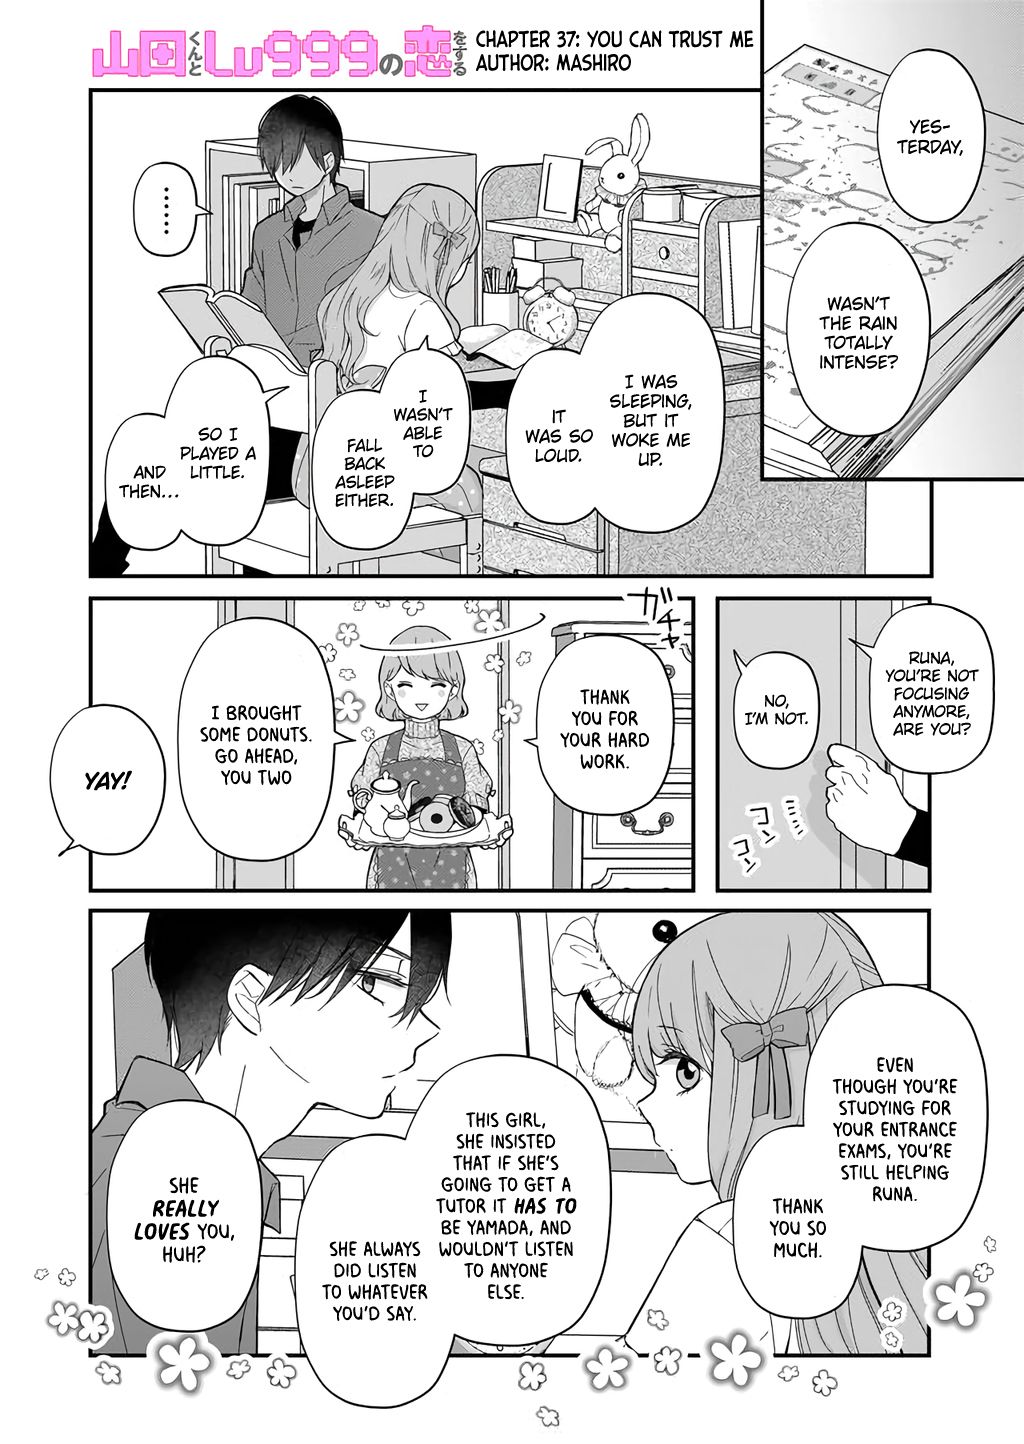 Chapter 56, My Love Story with Yamada-kun at Lv999